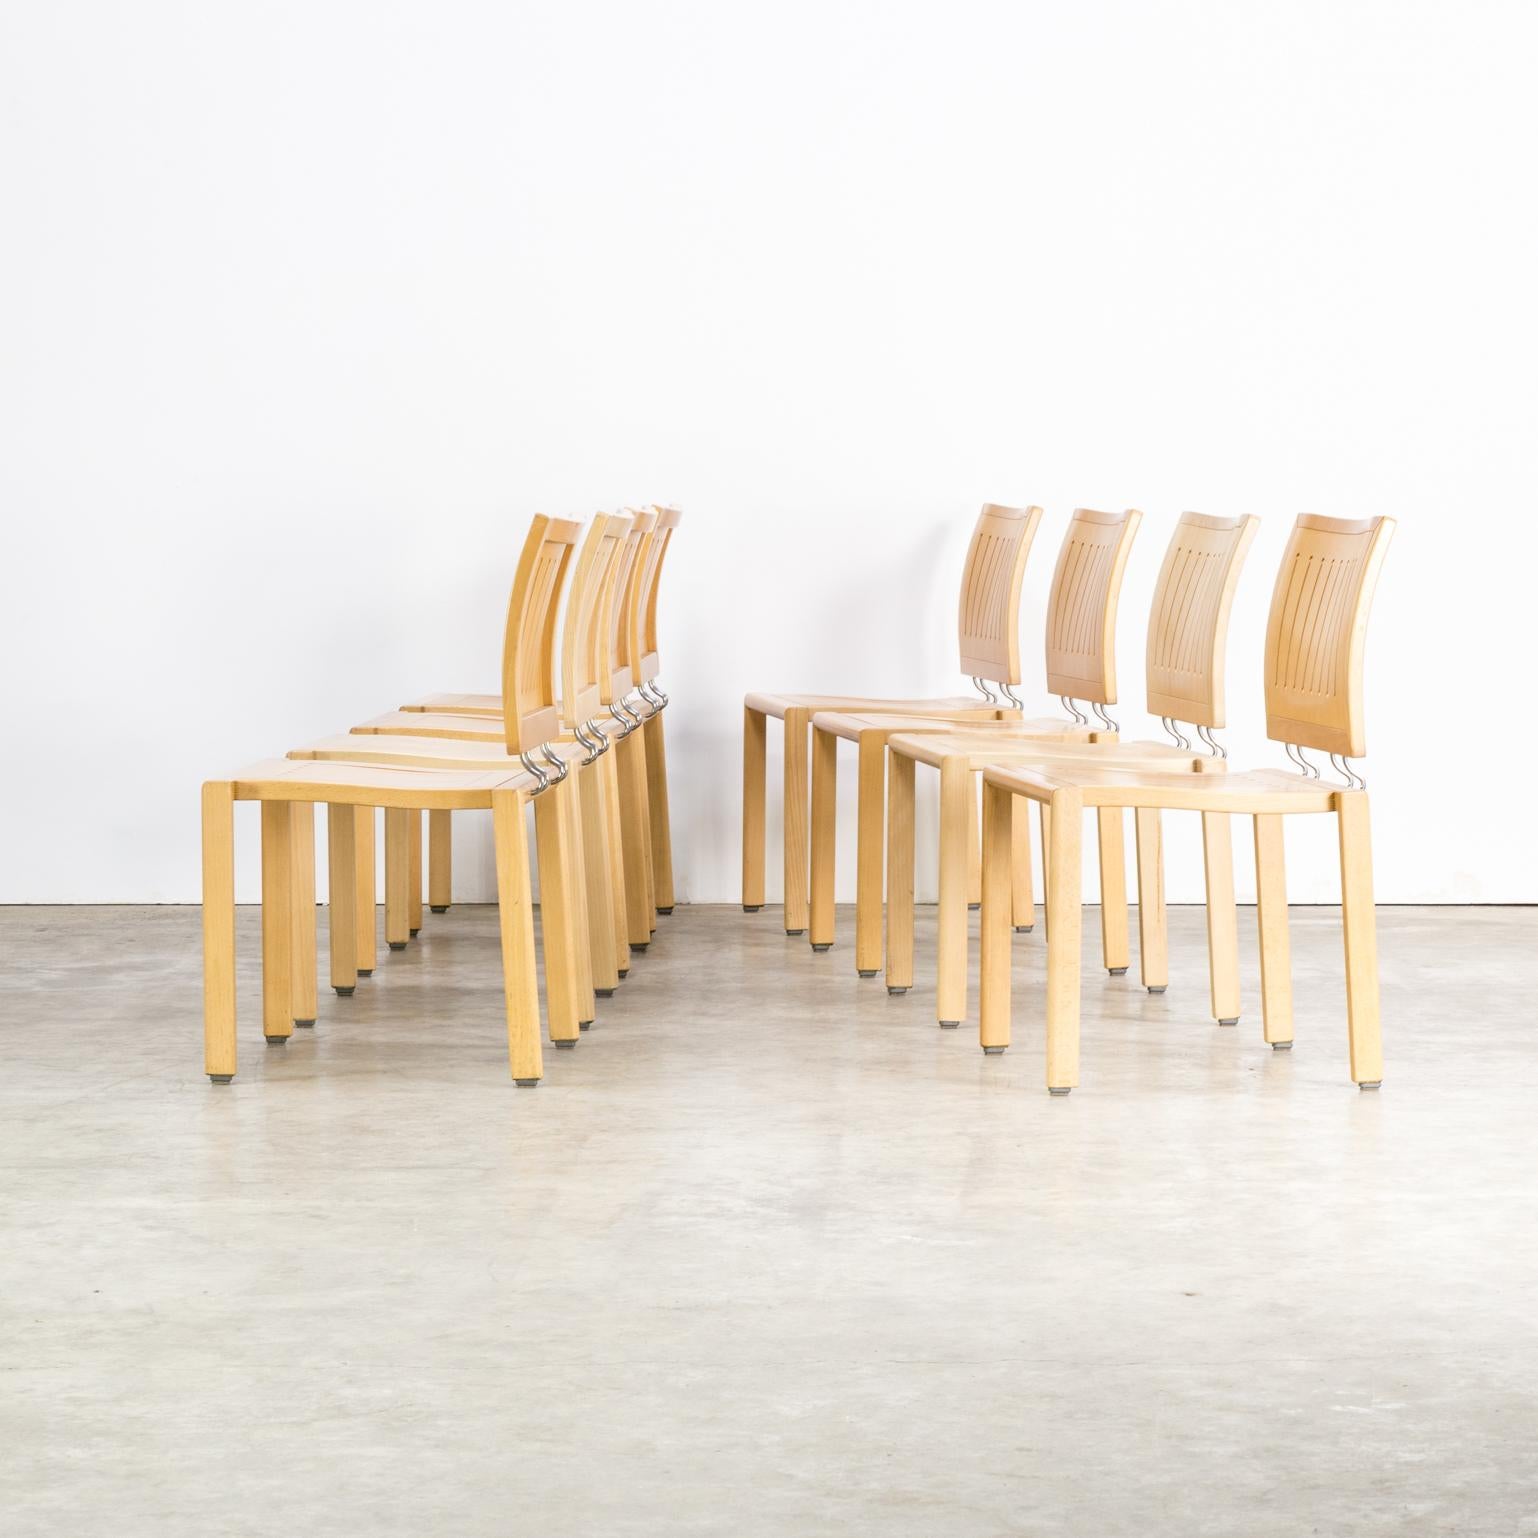 Swiss Bruno Rey & Charles Polin “Quadro W” Dining Chair for Dietiker, Set of 8 For Sale